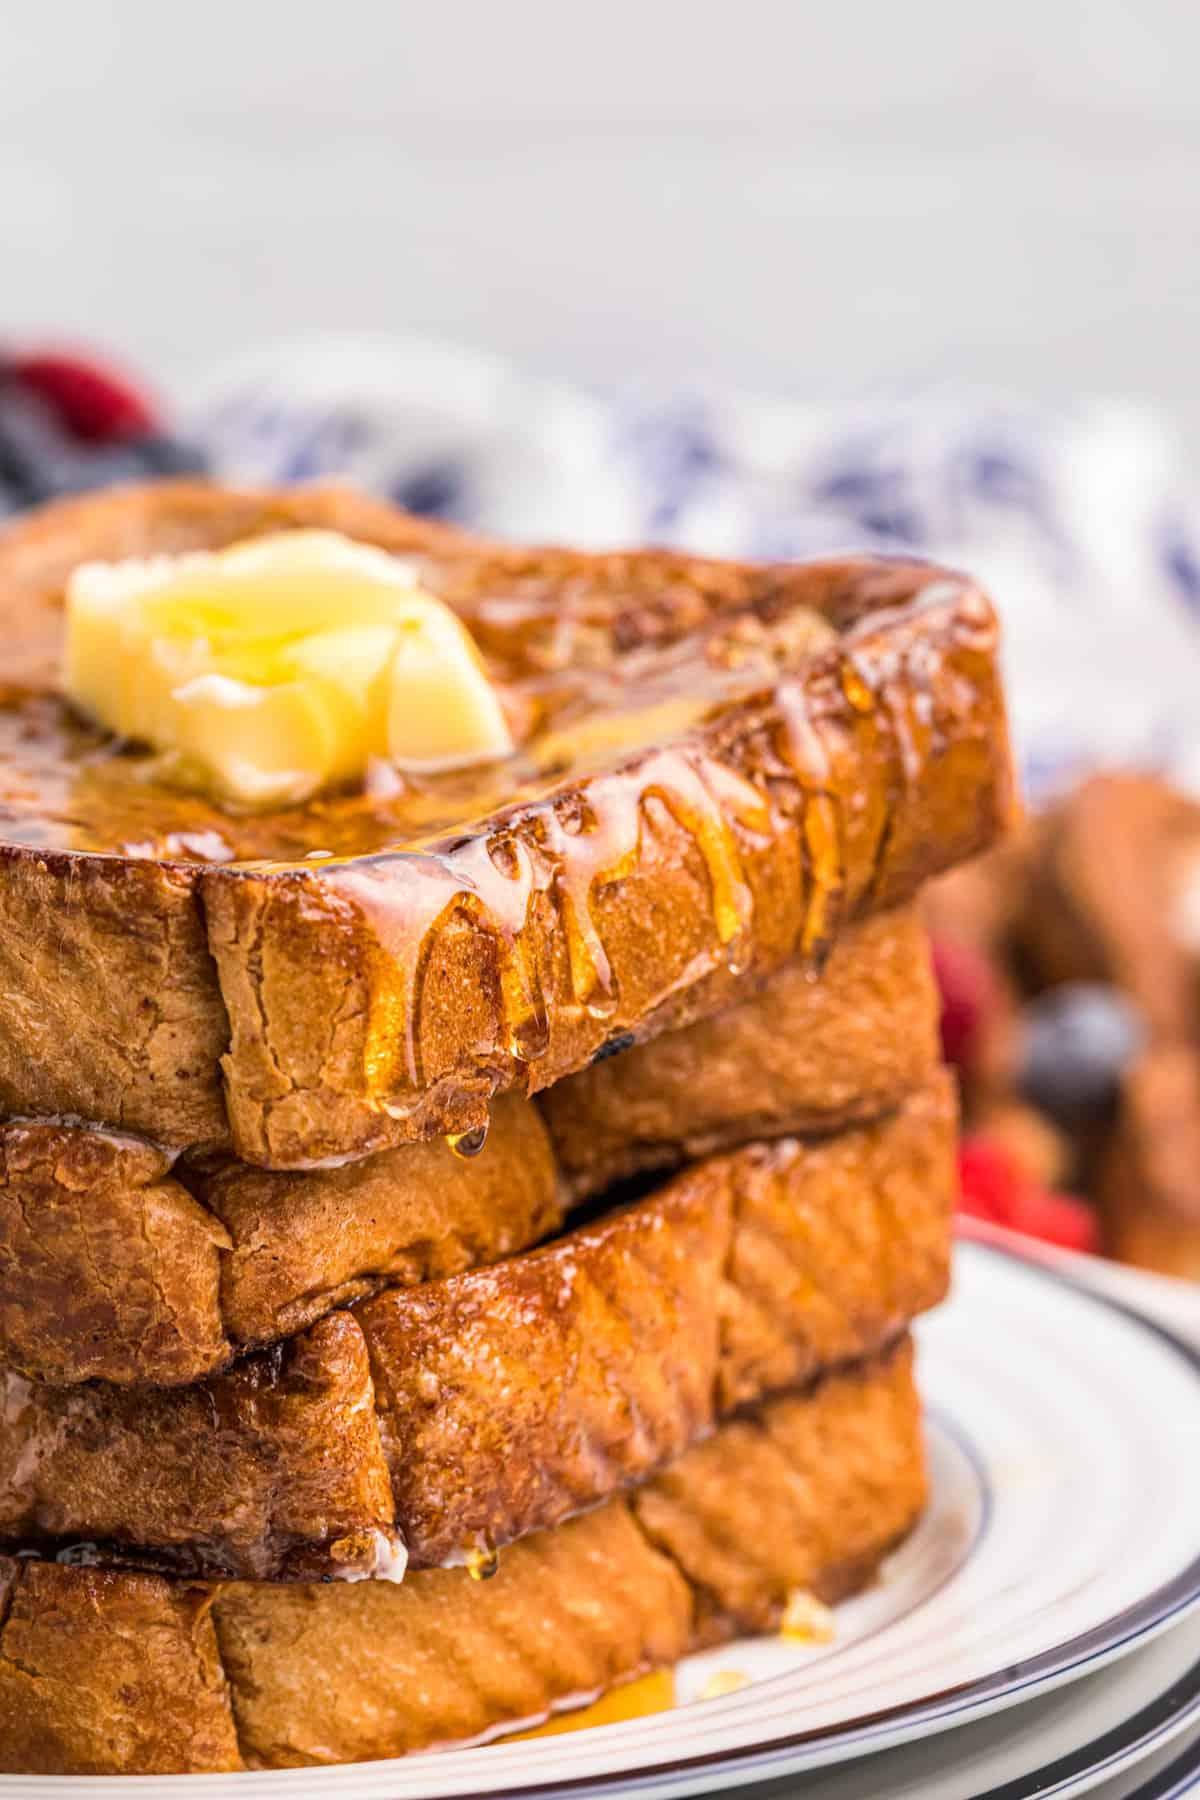 Blackstone French Toast Recipe Smothered in Butter and Syrup